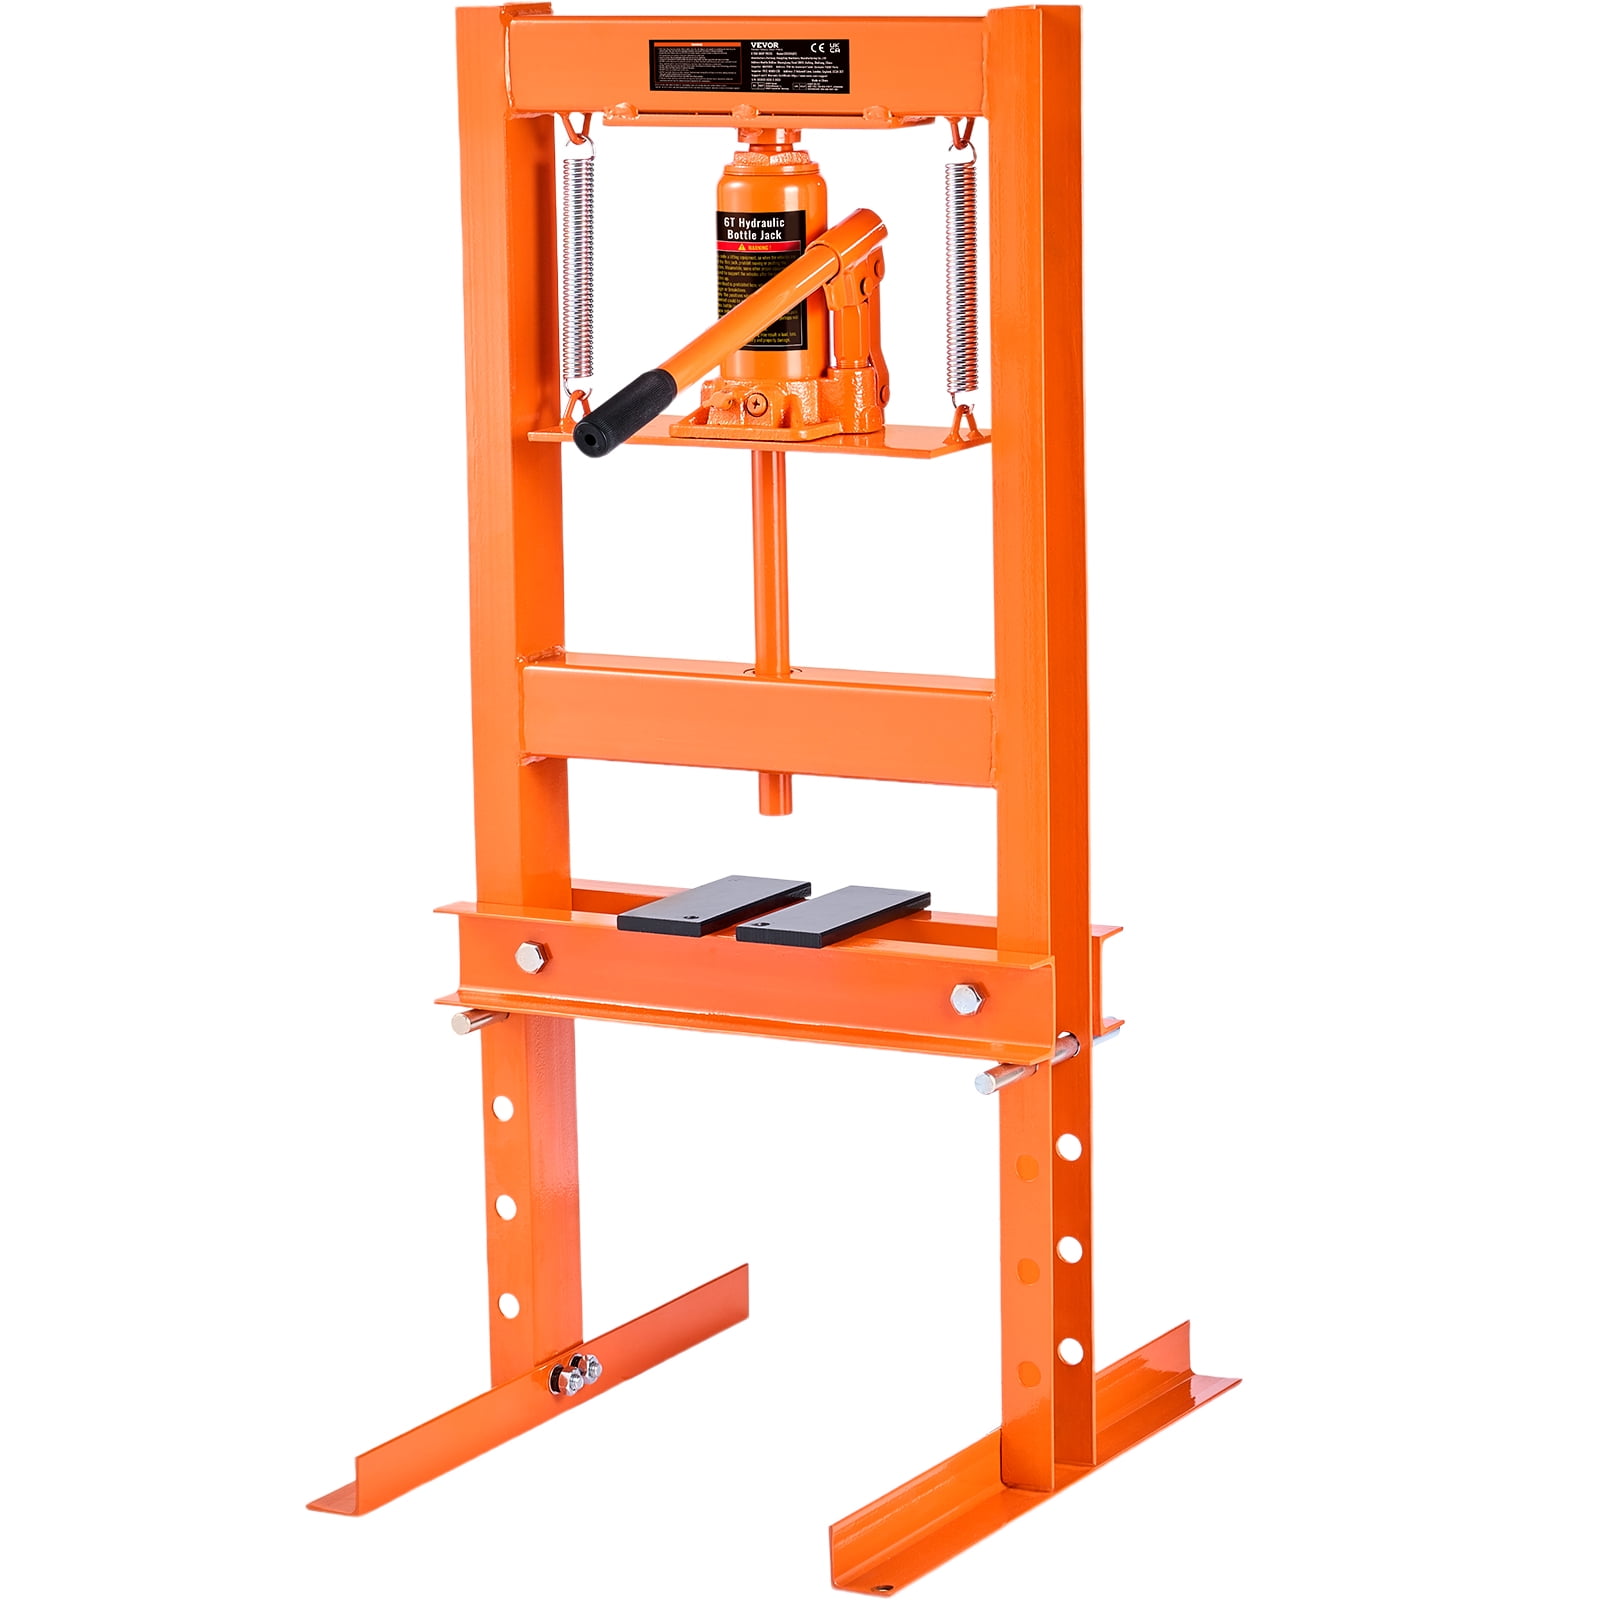 TUFFIOM 6-Ton Hydraulic Shop Press with Press Plates, H-Frame Garage  Benchtop Press, Adjustable Working Table Height, 18.9”L x 15.75”W x 36.8”H